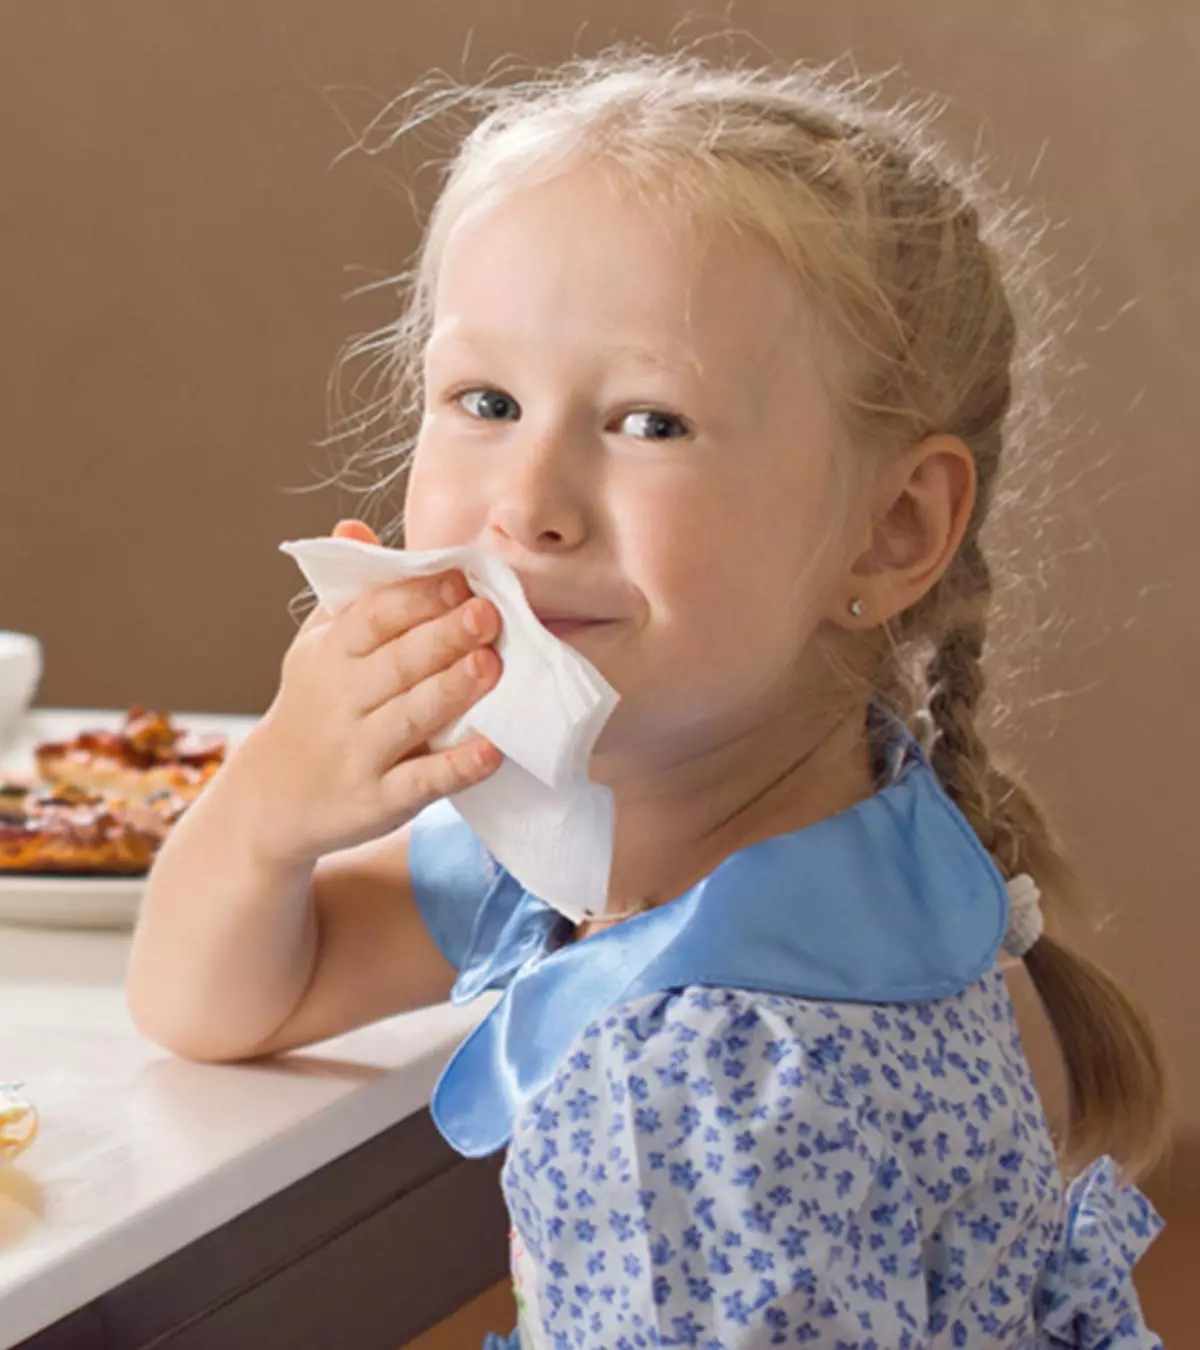 15+ Table Manners For Kids Of Every Age To Learn And Follow